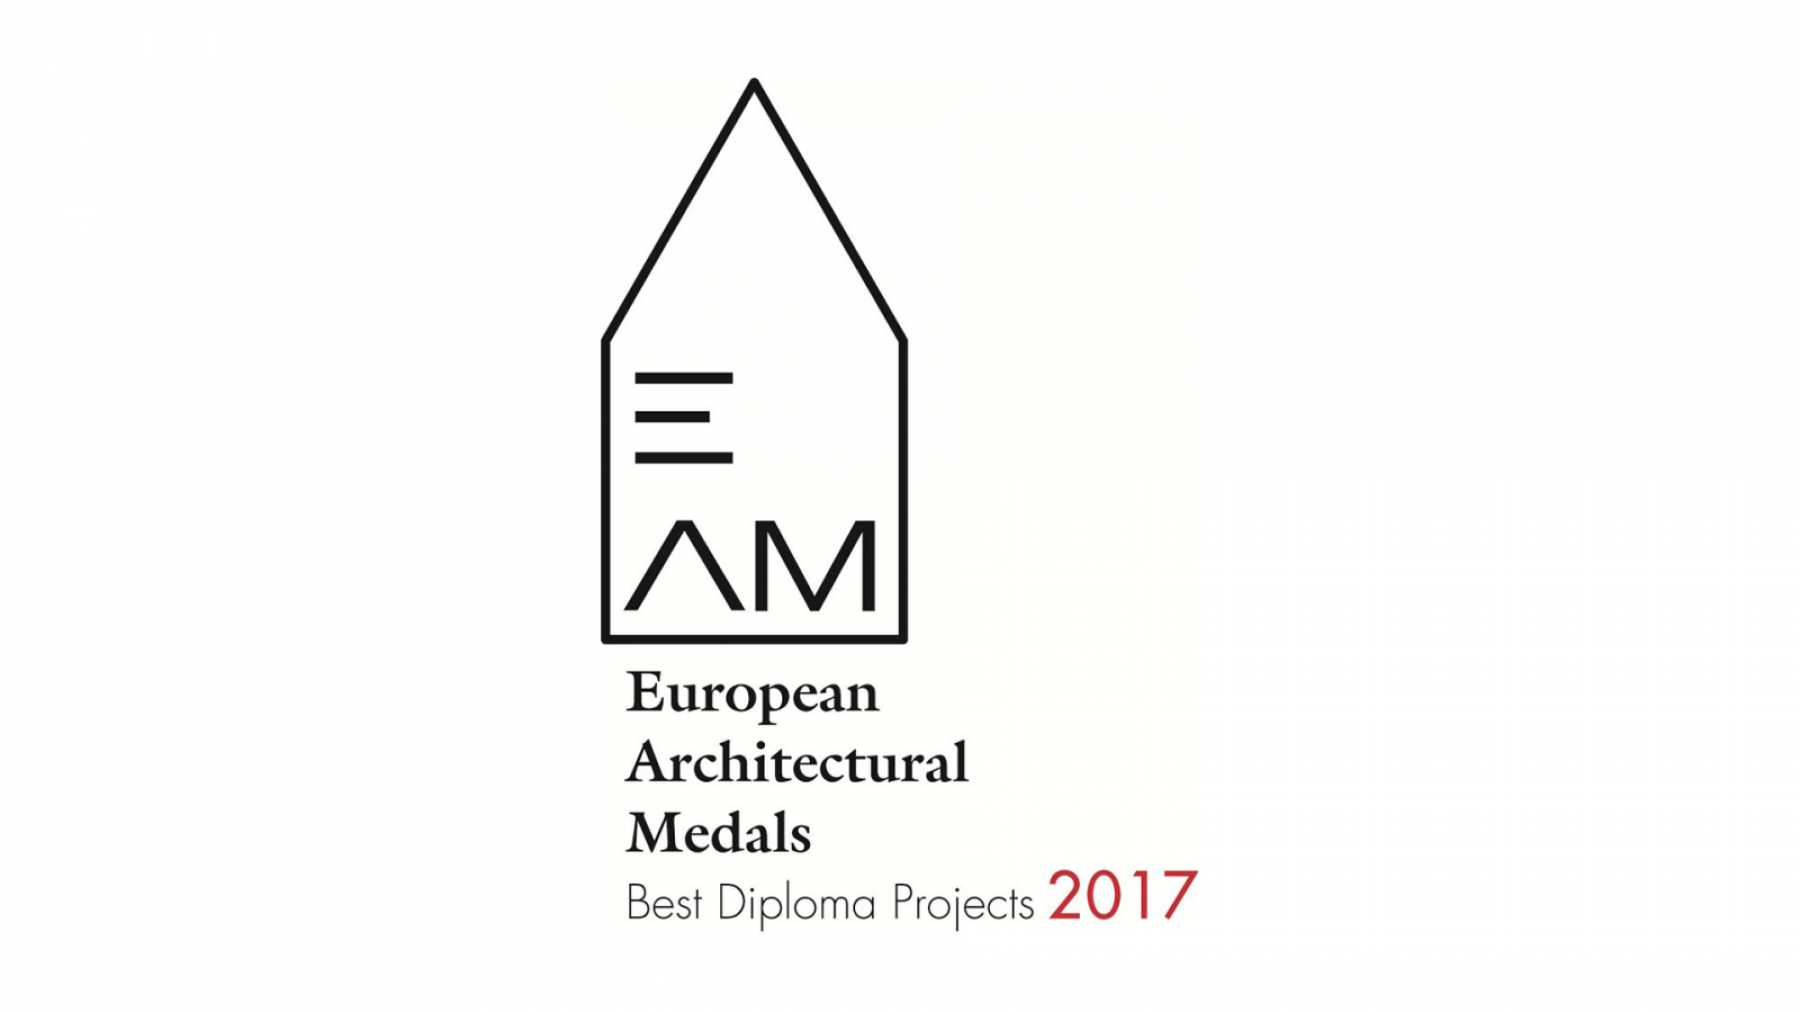 One United Properties supported The European Architectural Medal For Best Diploma Project